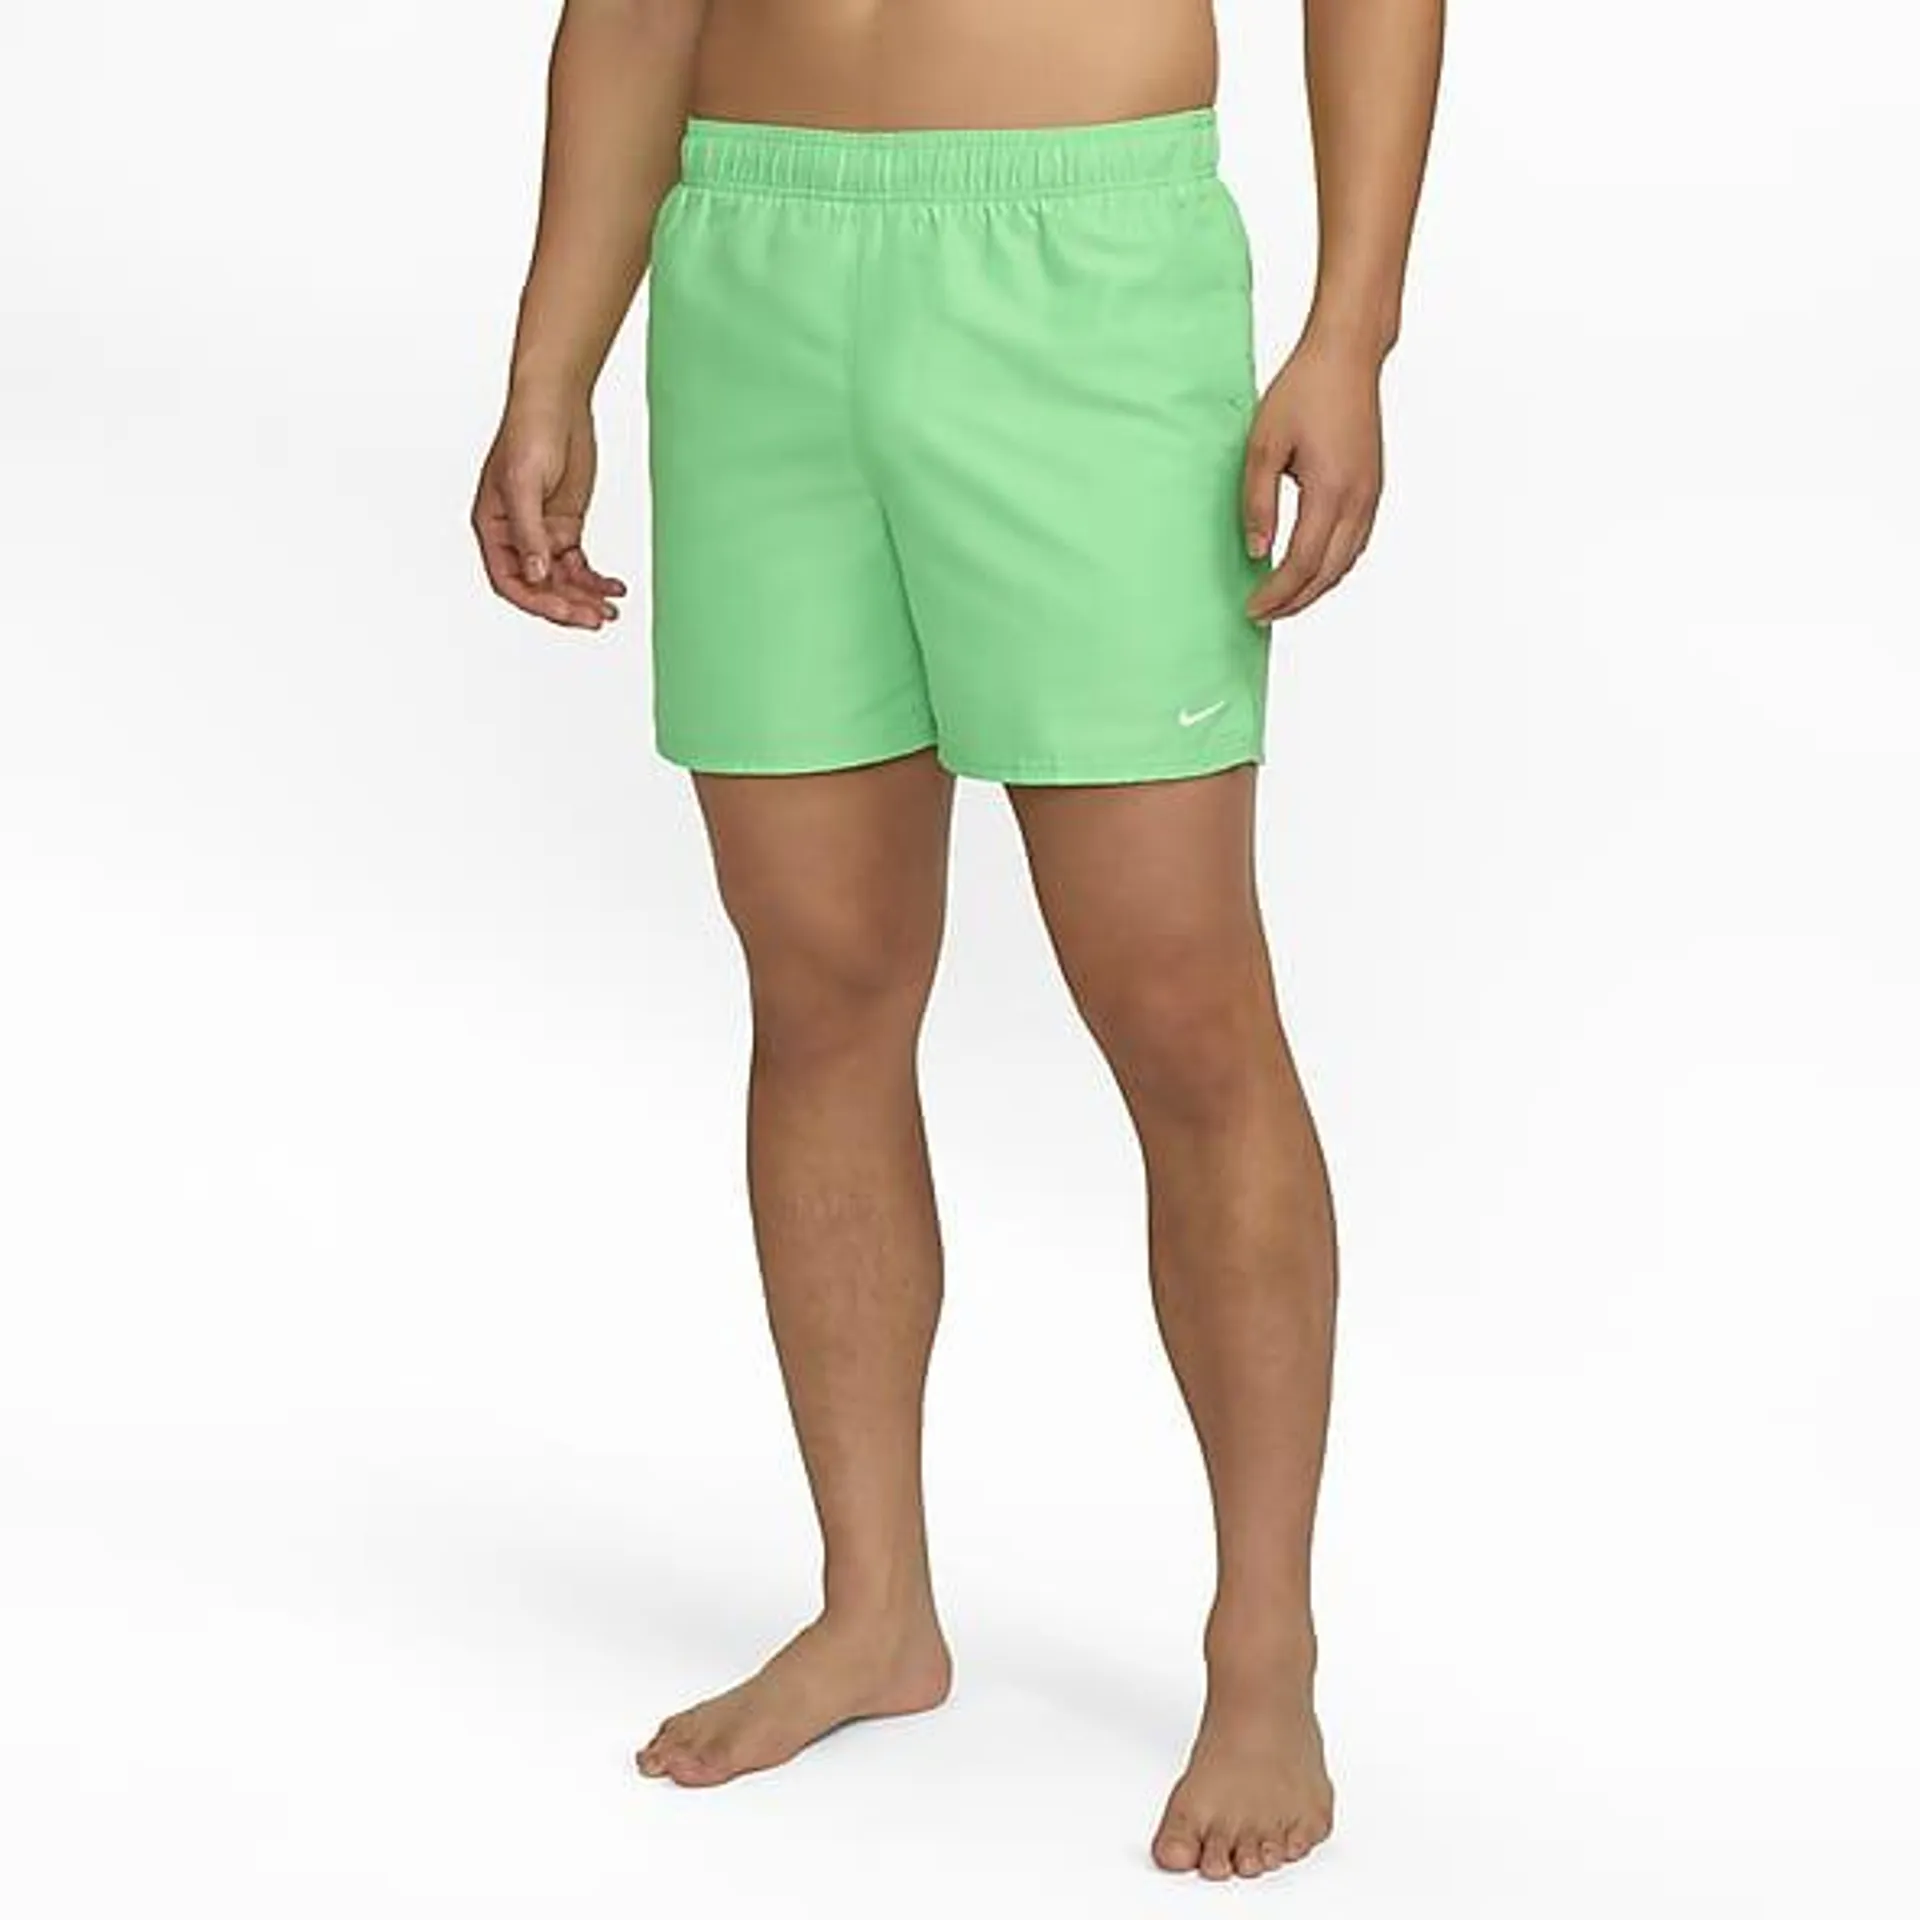 Men's 13cm (approx.) Lap Volley Swimming Shorts